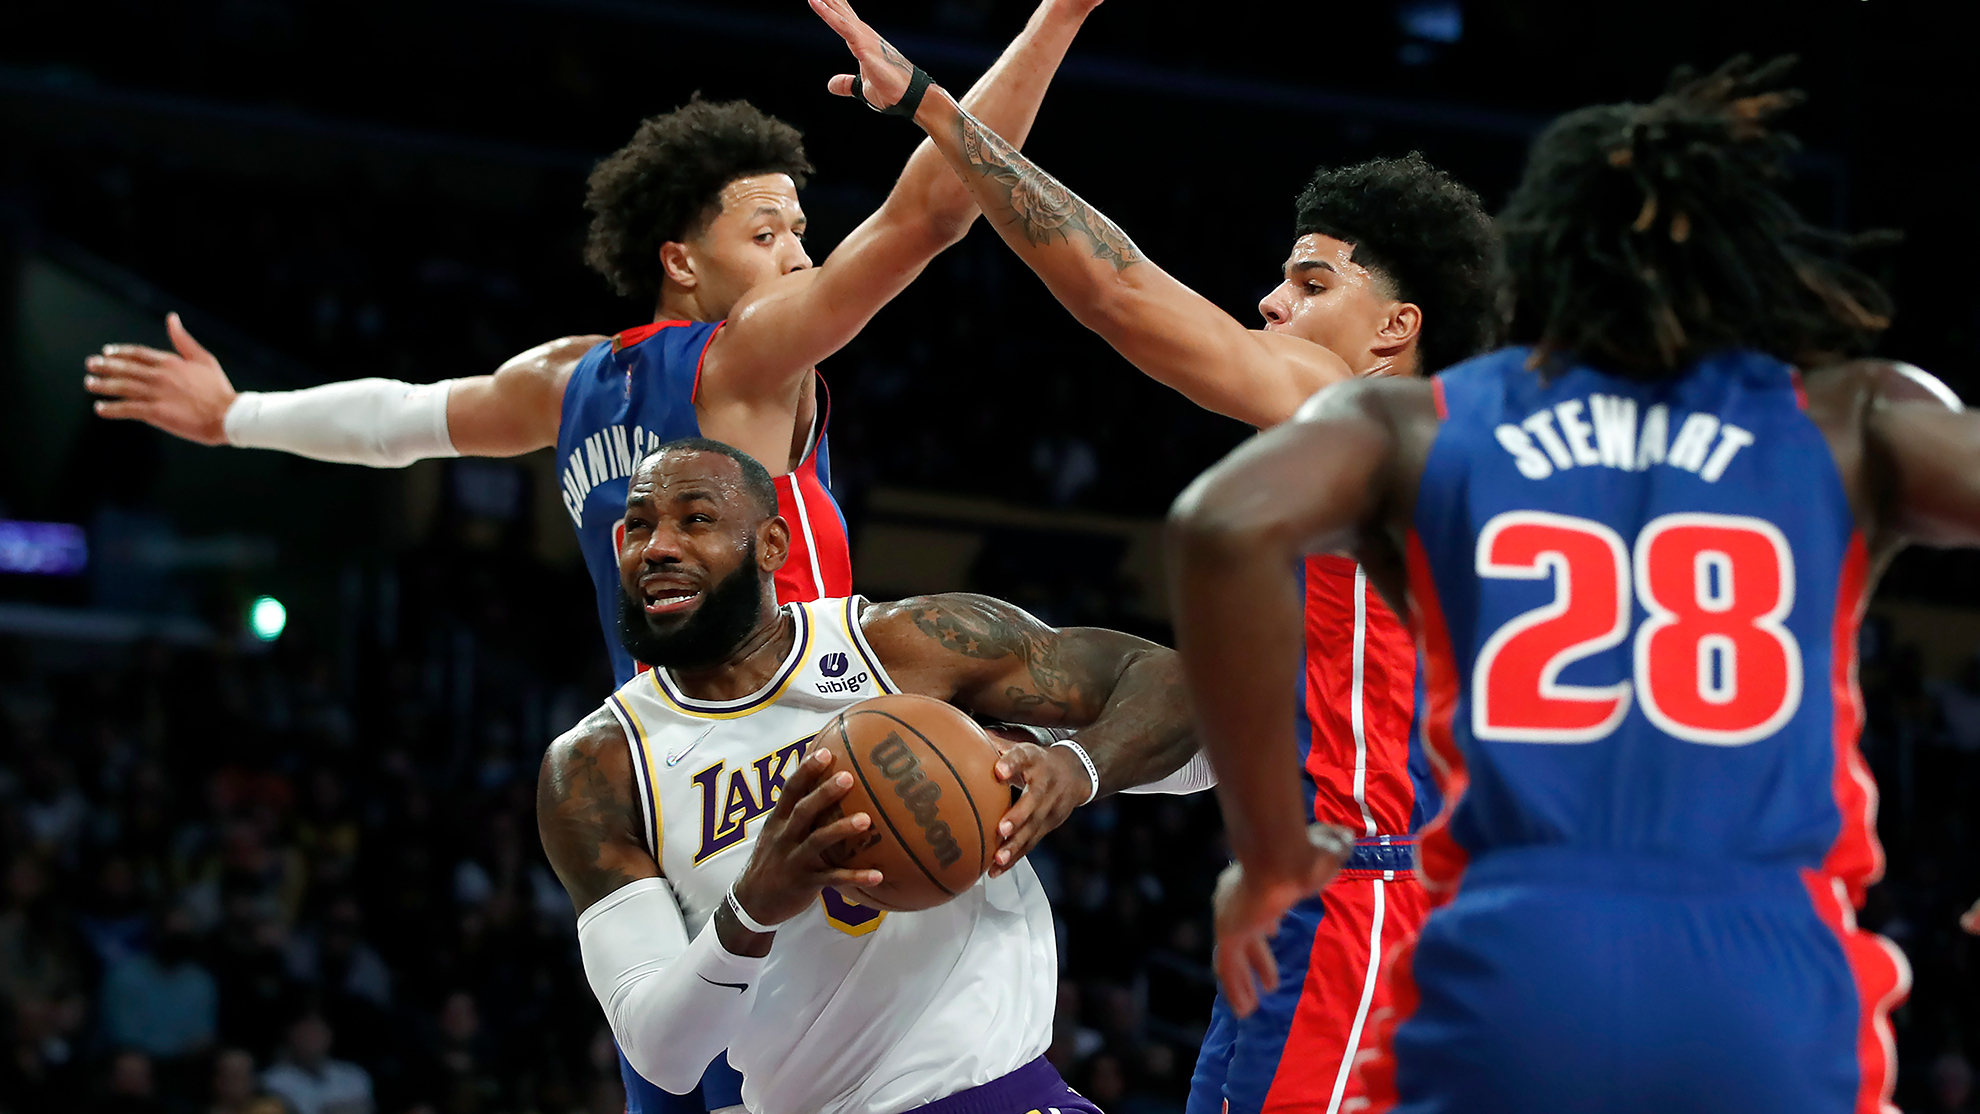 LeBron James leads Lakers to win over Pistons with 33 points | Marca